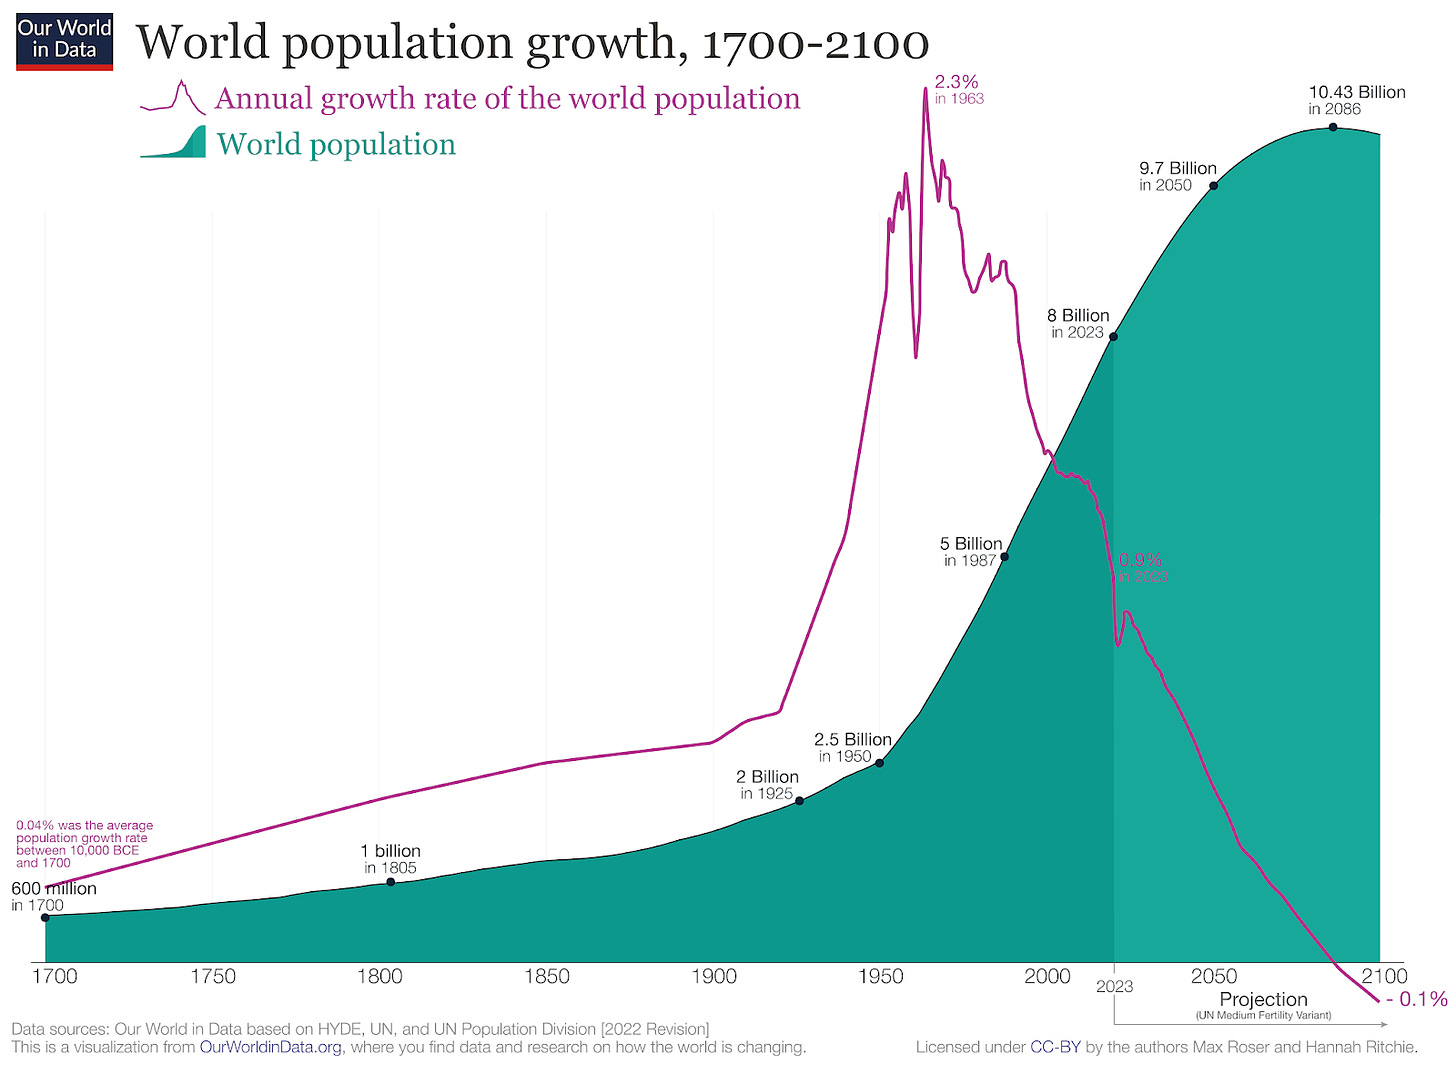 From Our World in Data, along with a United Nations projection into the future.A chart showing how the global population has changed since 1700, projected until 2100. The prediction is a peak in global population around 2086.